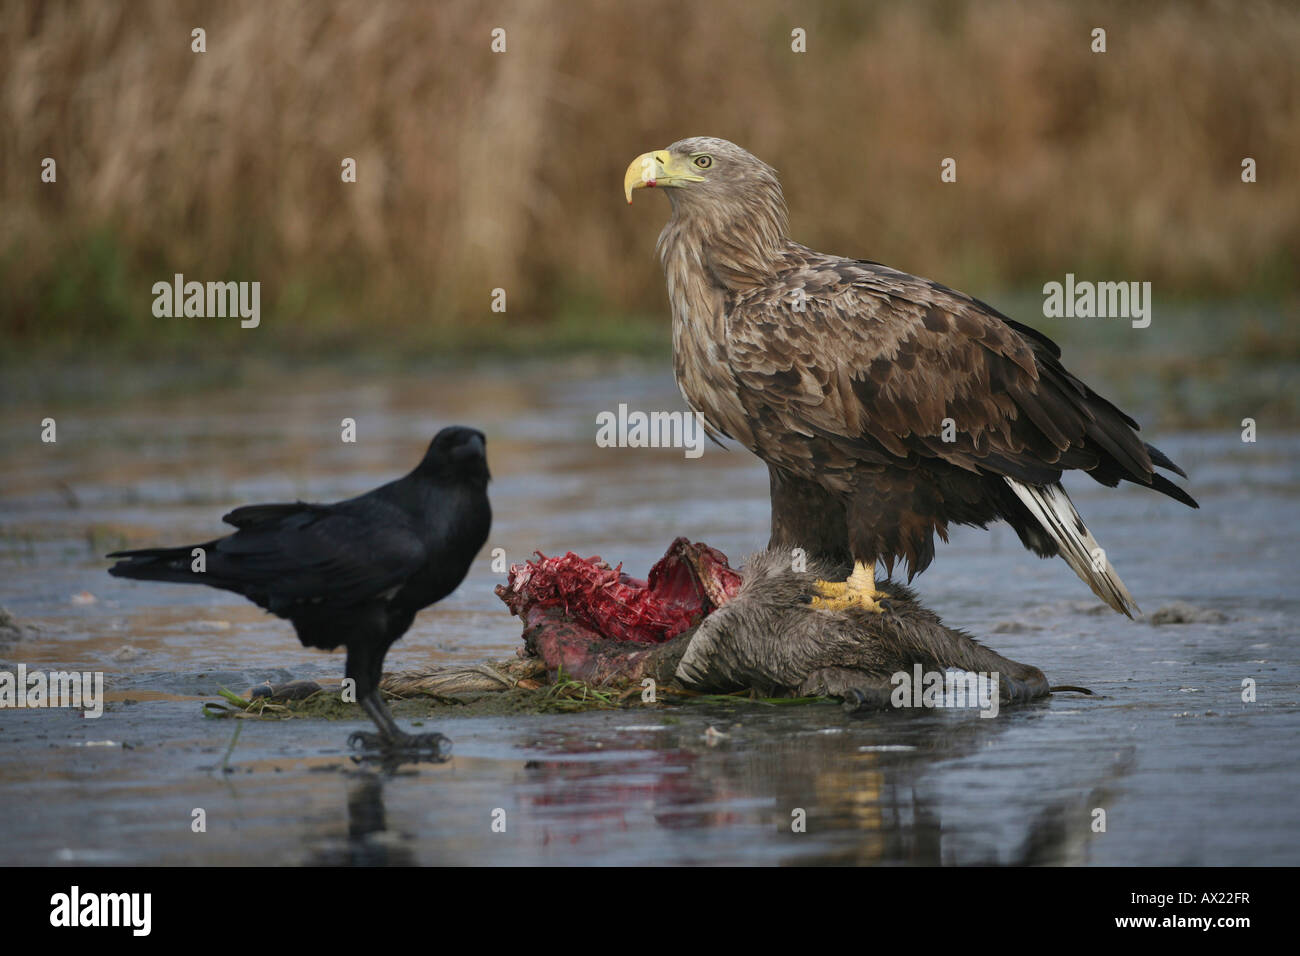 White-tailed Eagle or Sea Eagle (Haliaeetus albicilla) and Common Raven (Corvus corax) perched on an icy surface, feeding on de Stock Photo